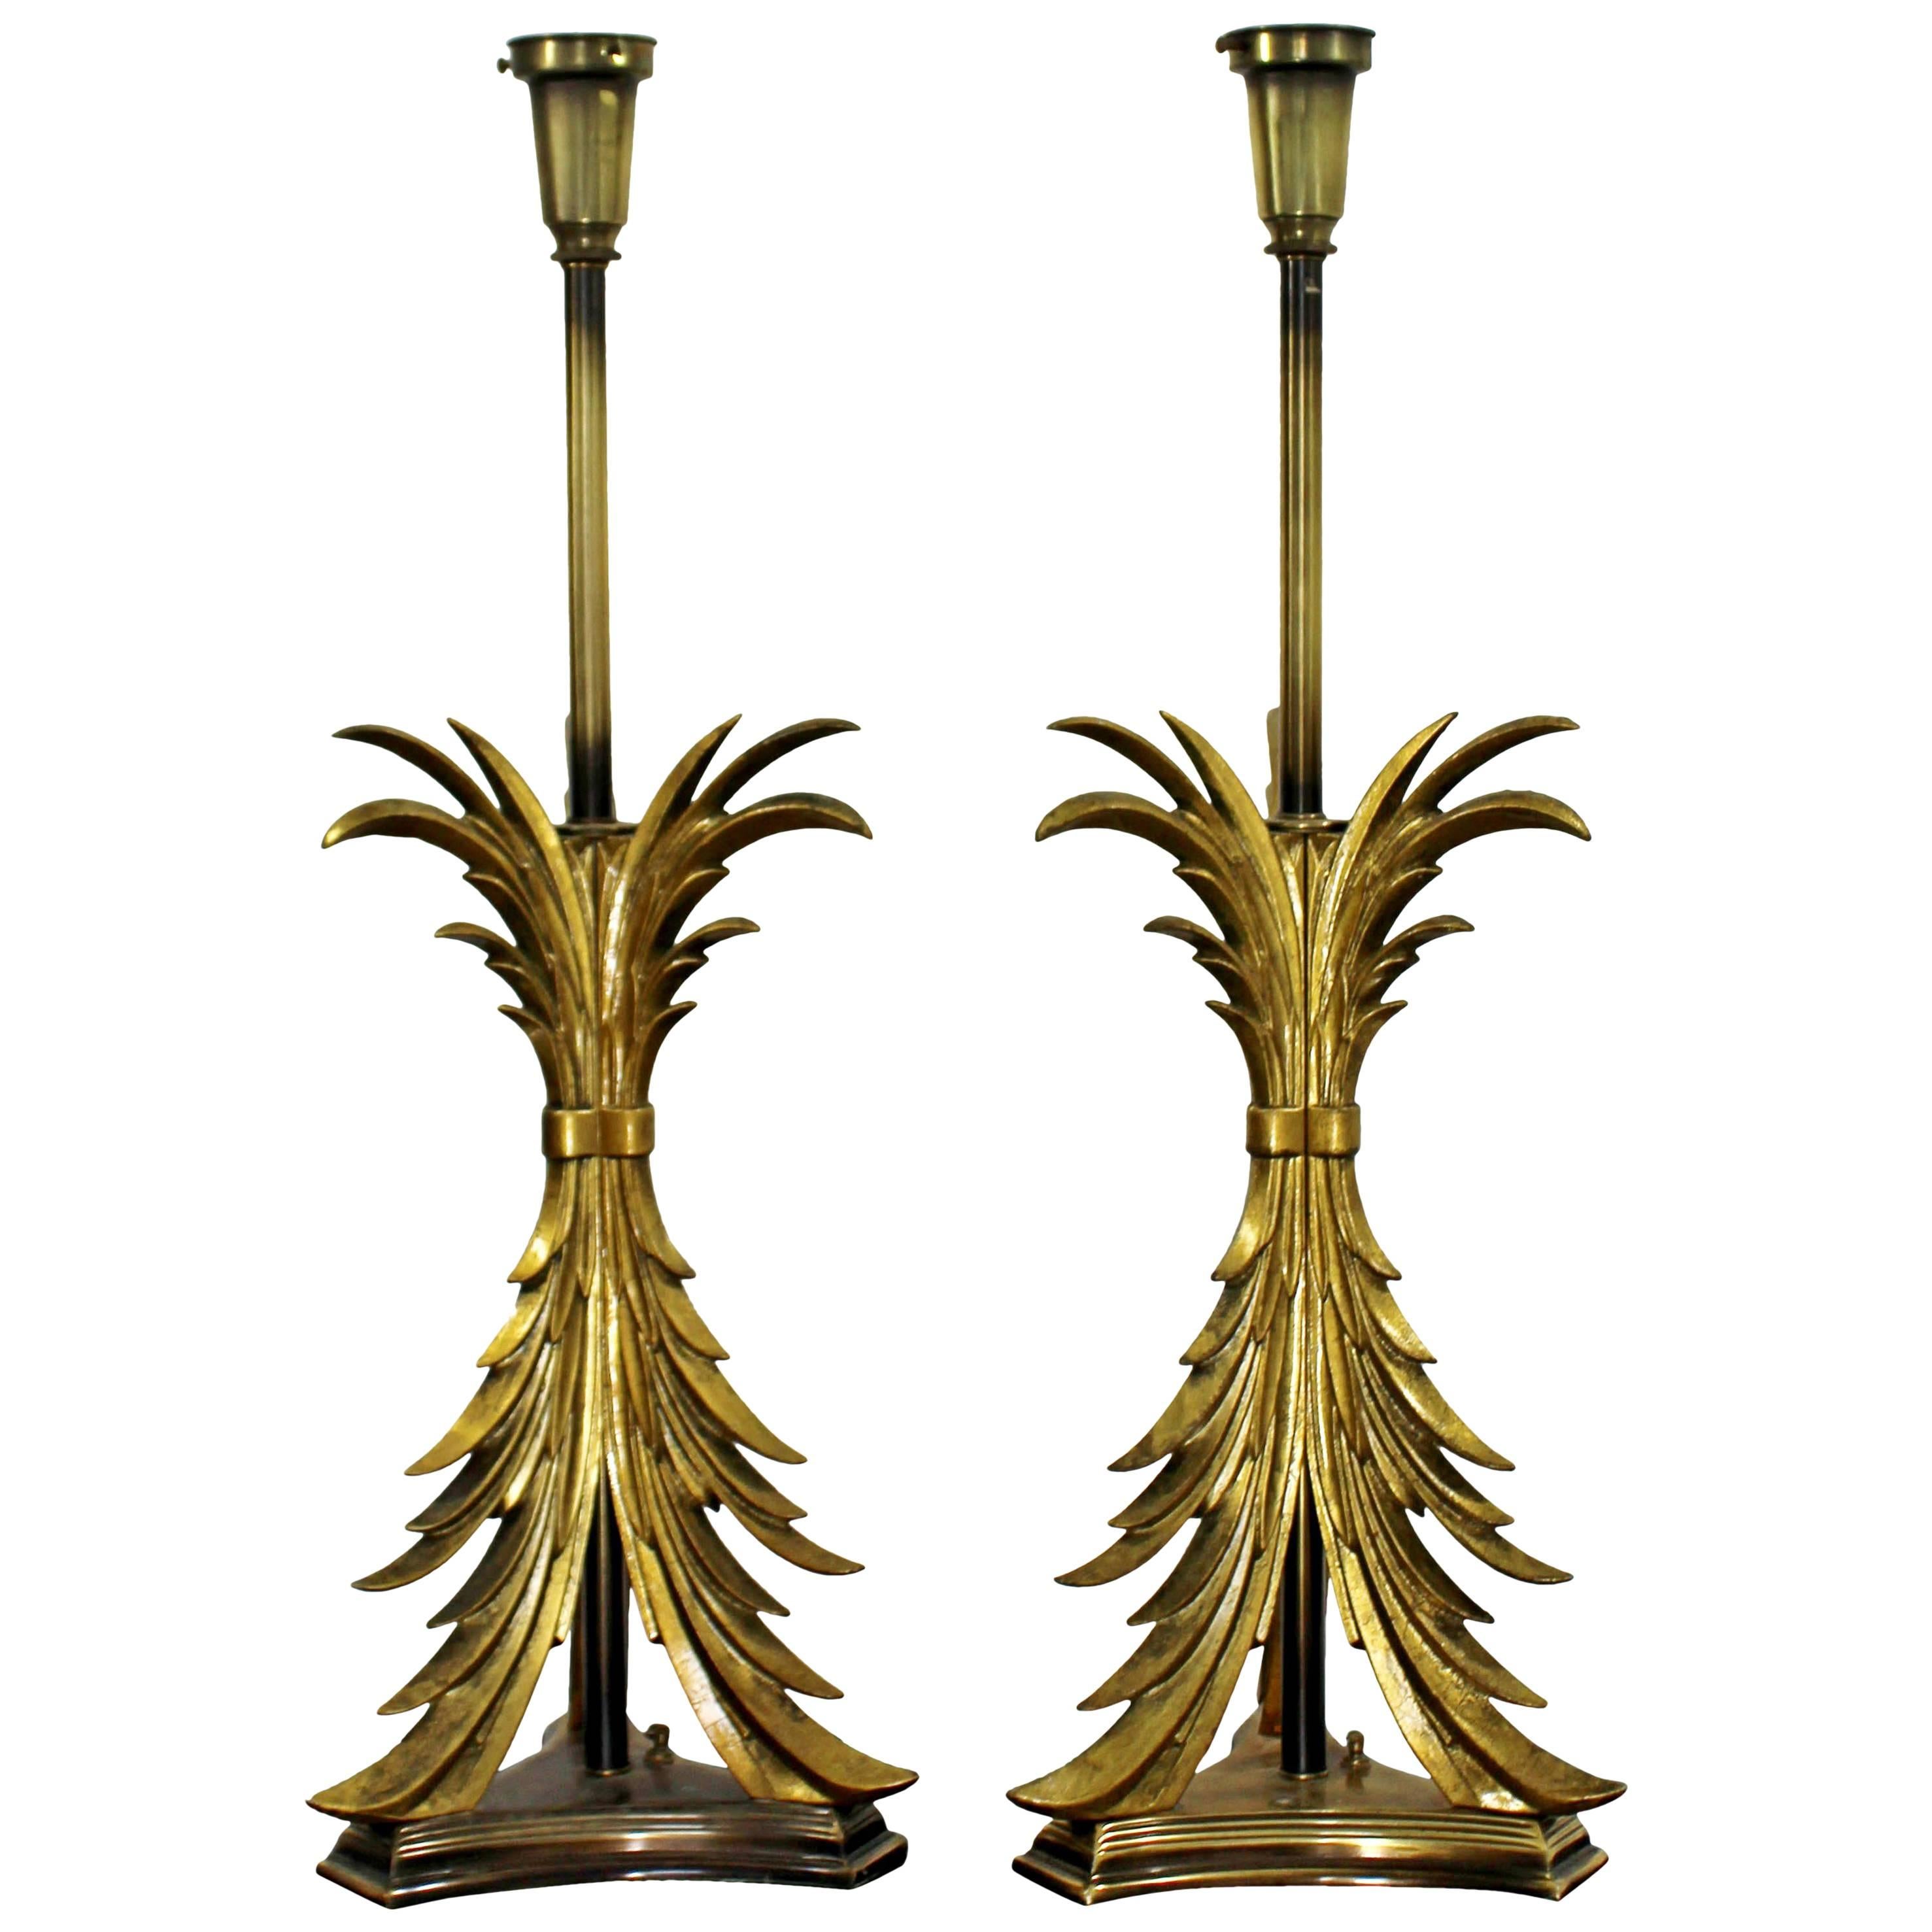 Hollywood Regency Pair of Solid Brass Ornate Chapman Table Lamps, 1980s